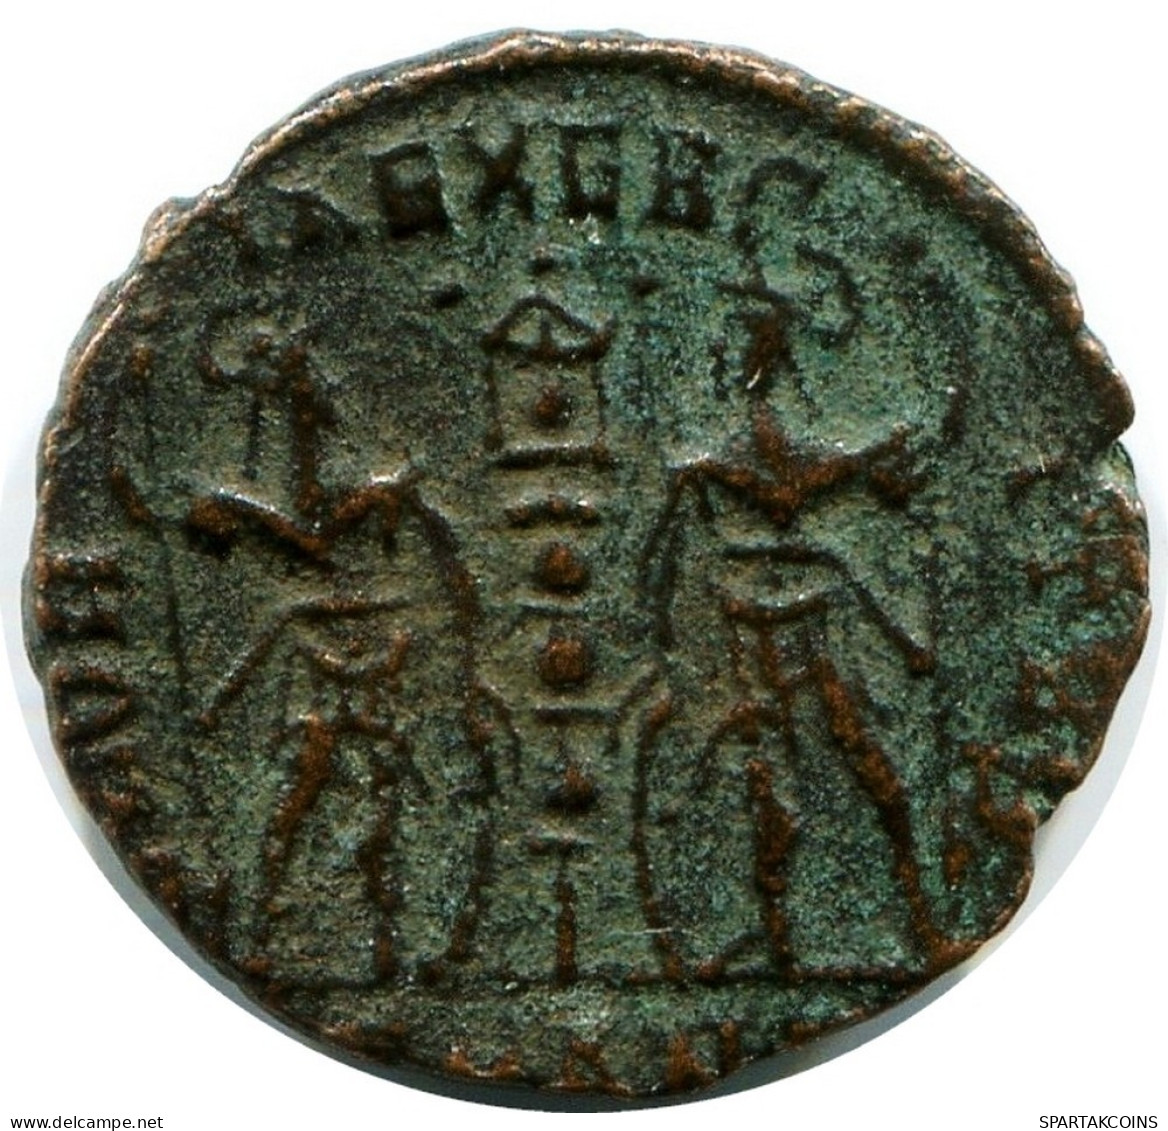 RÖMISCHE Münze MINTED IN ANTIOCH FROM THE ROYAL ONTARIO MUSEUM #ANC11303.14.D.A - The Christian Empire (307 AD To 363 AD)